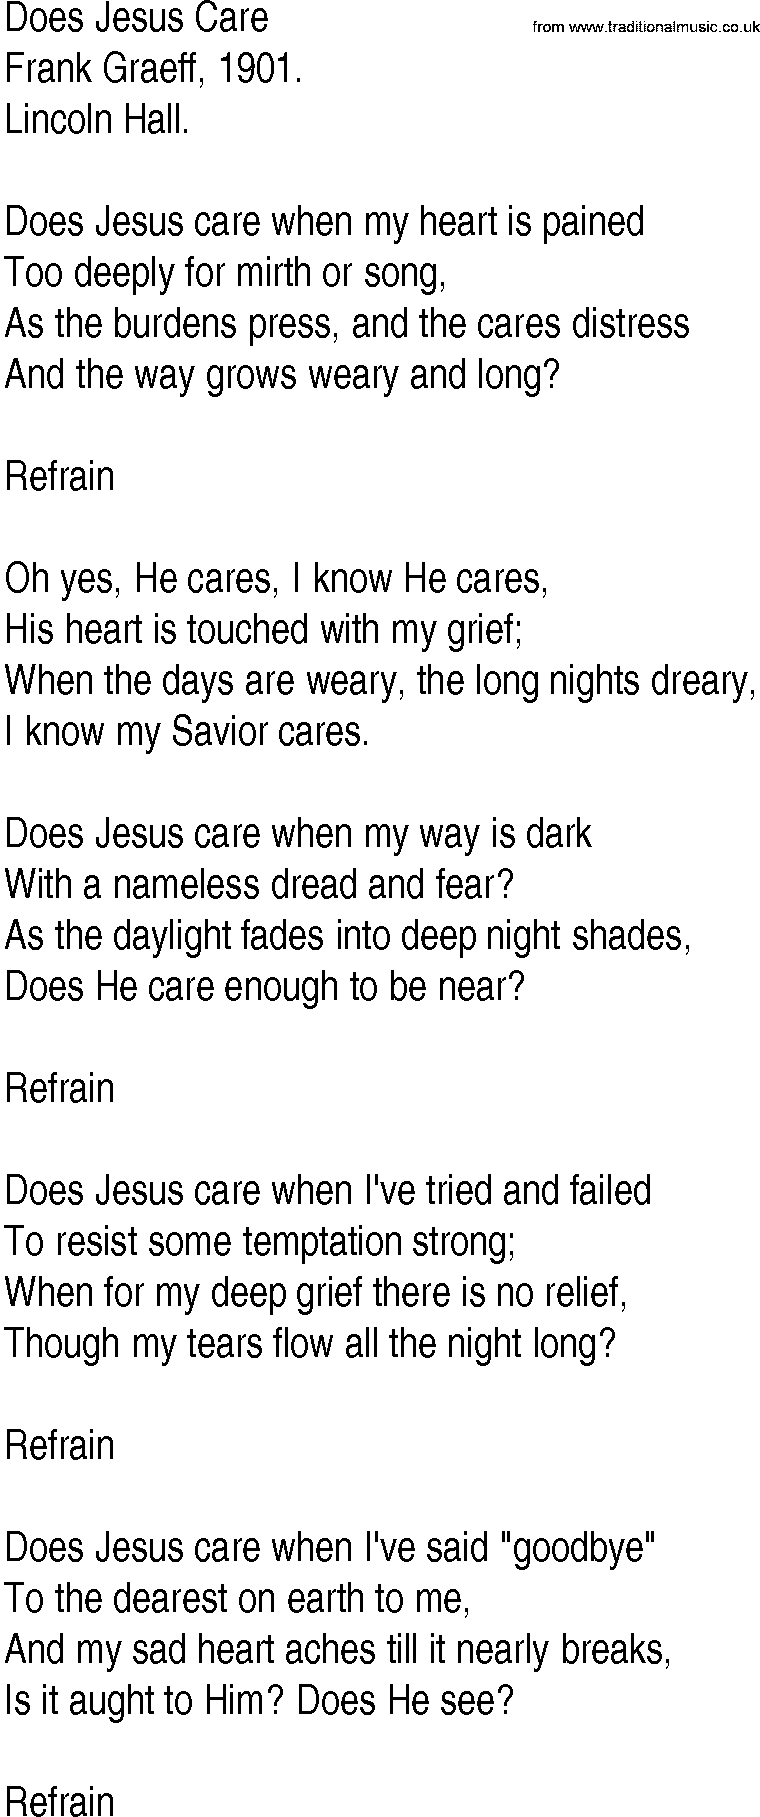 Hymn and Gospel Song: Does Jesus Care by Frank Graeff lyrics